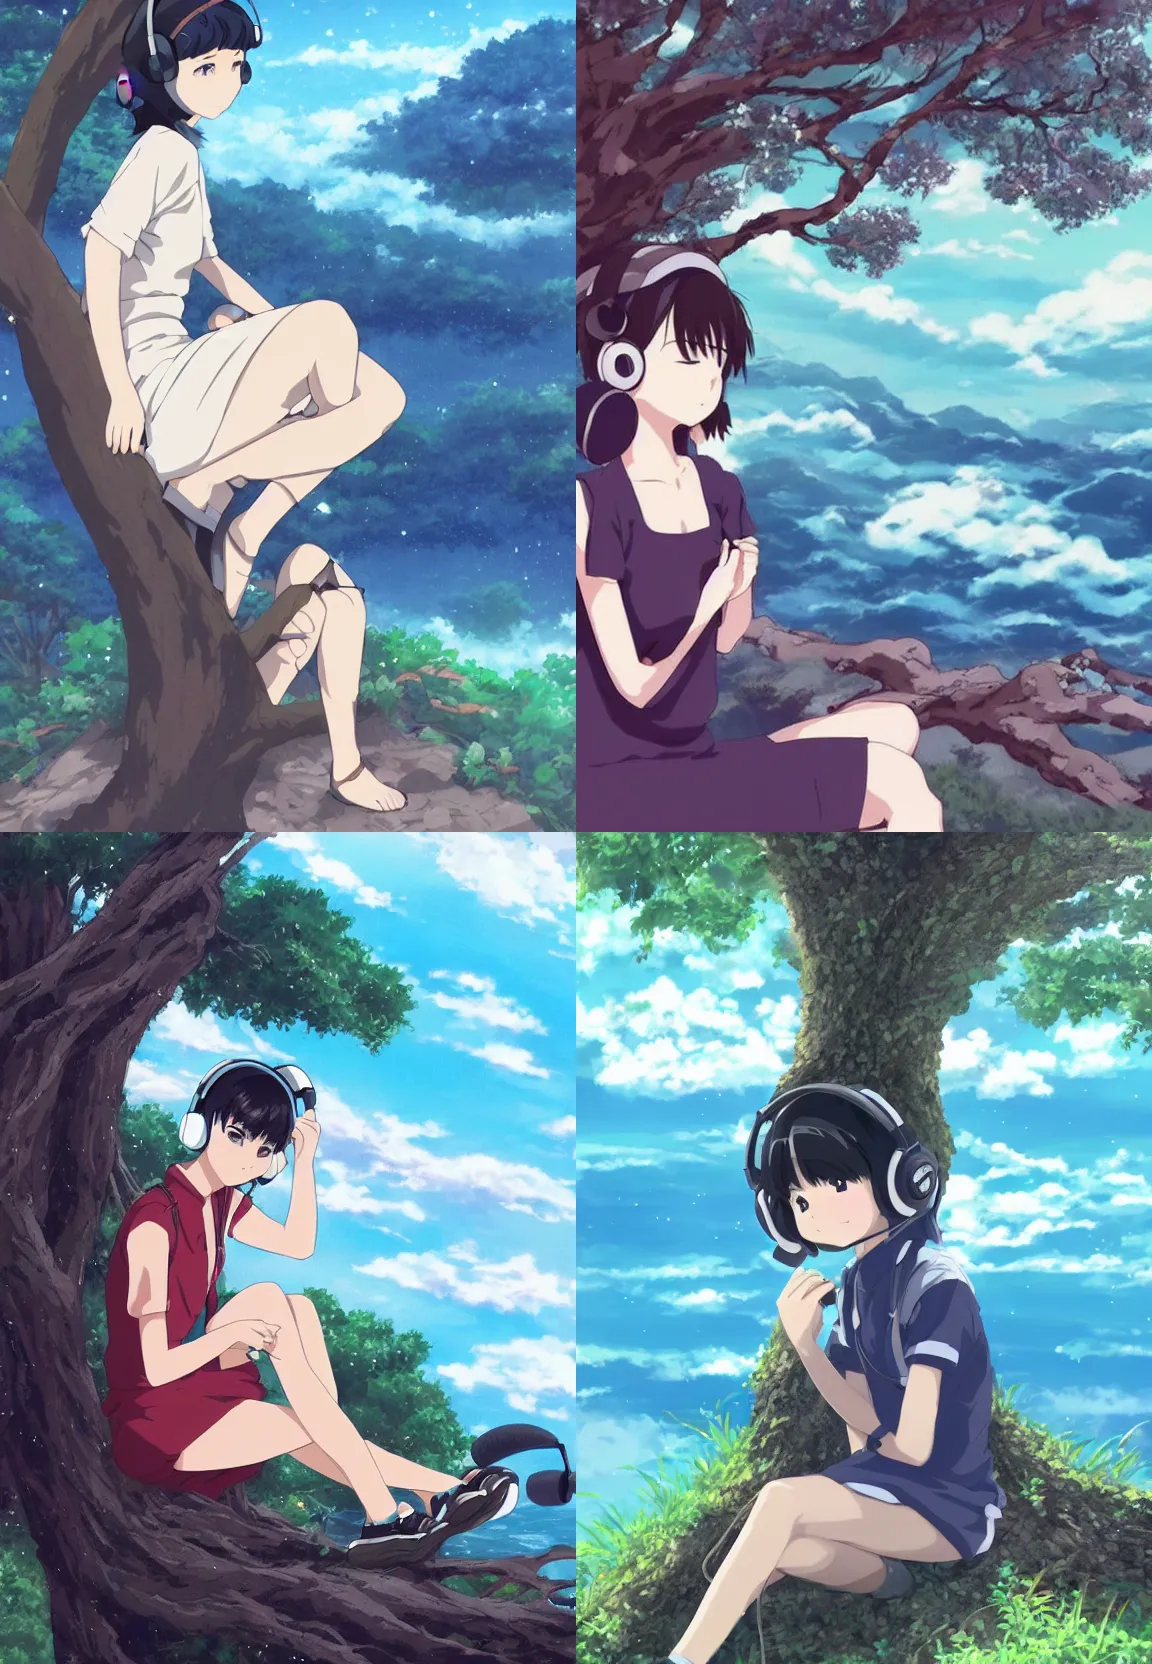 Prompt: A Beautiful Anime Girl with Short Black Hair wearing Headphones, Listening to music, sitting against a tree, on a cliff, cloudy, rainy, ocean waves, epic, beautiful, masterpiece, glowing, Ghibli